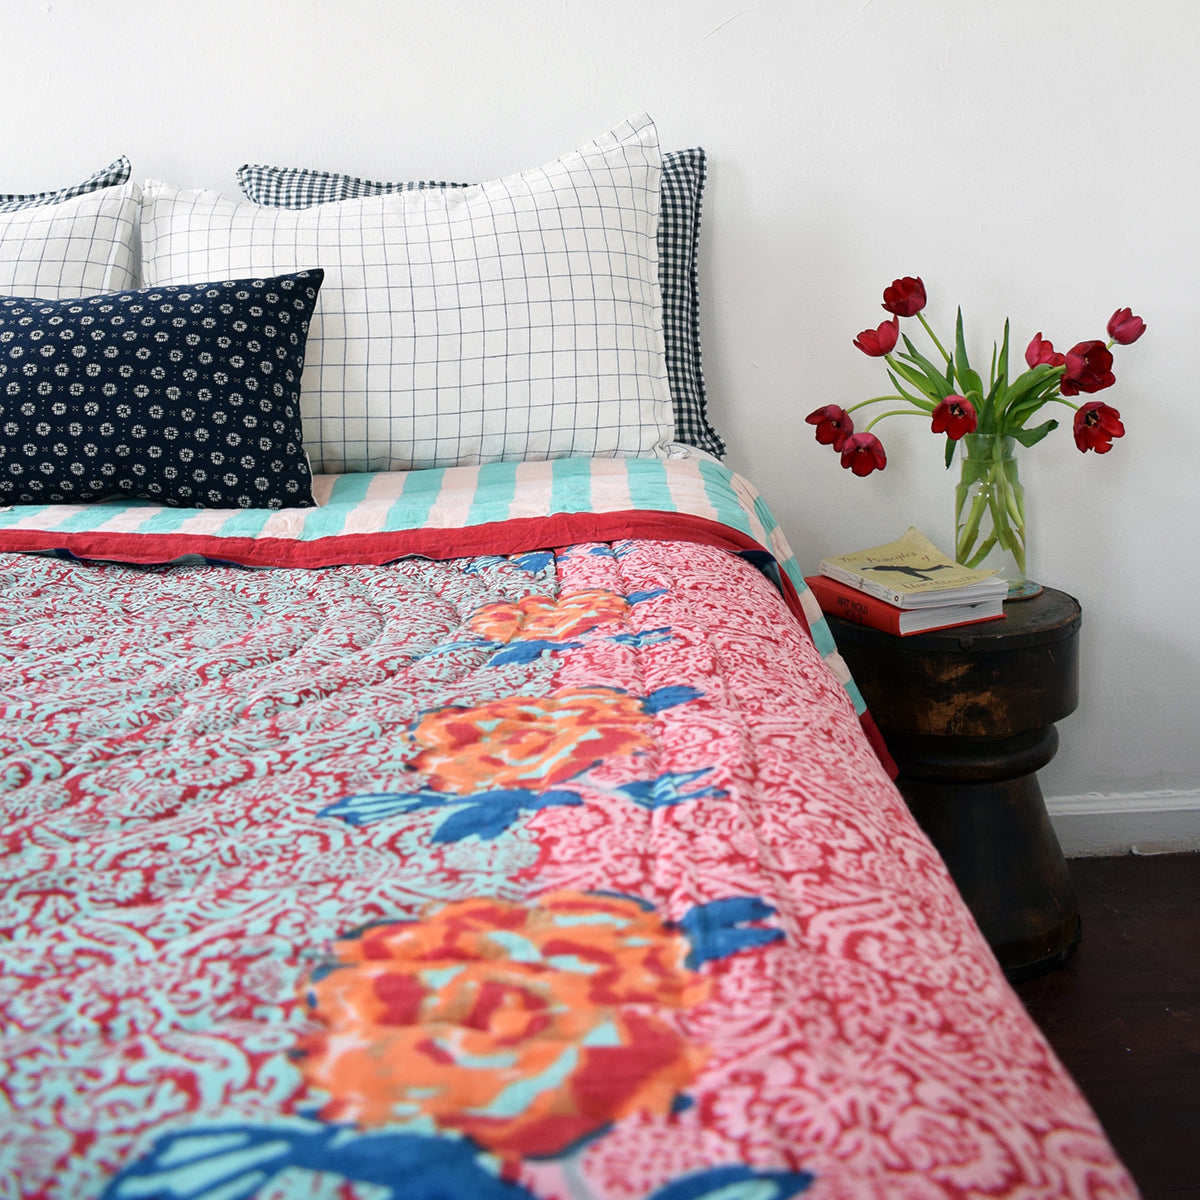 Linge Particulier Anthracite Gingham Standard Linen Pillowcase Sham with a Lisa Corti quilt and navy check shams for a colorful linen bedding look in dark check gingham - Collyer&#39;s Mansion